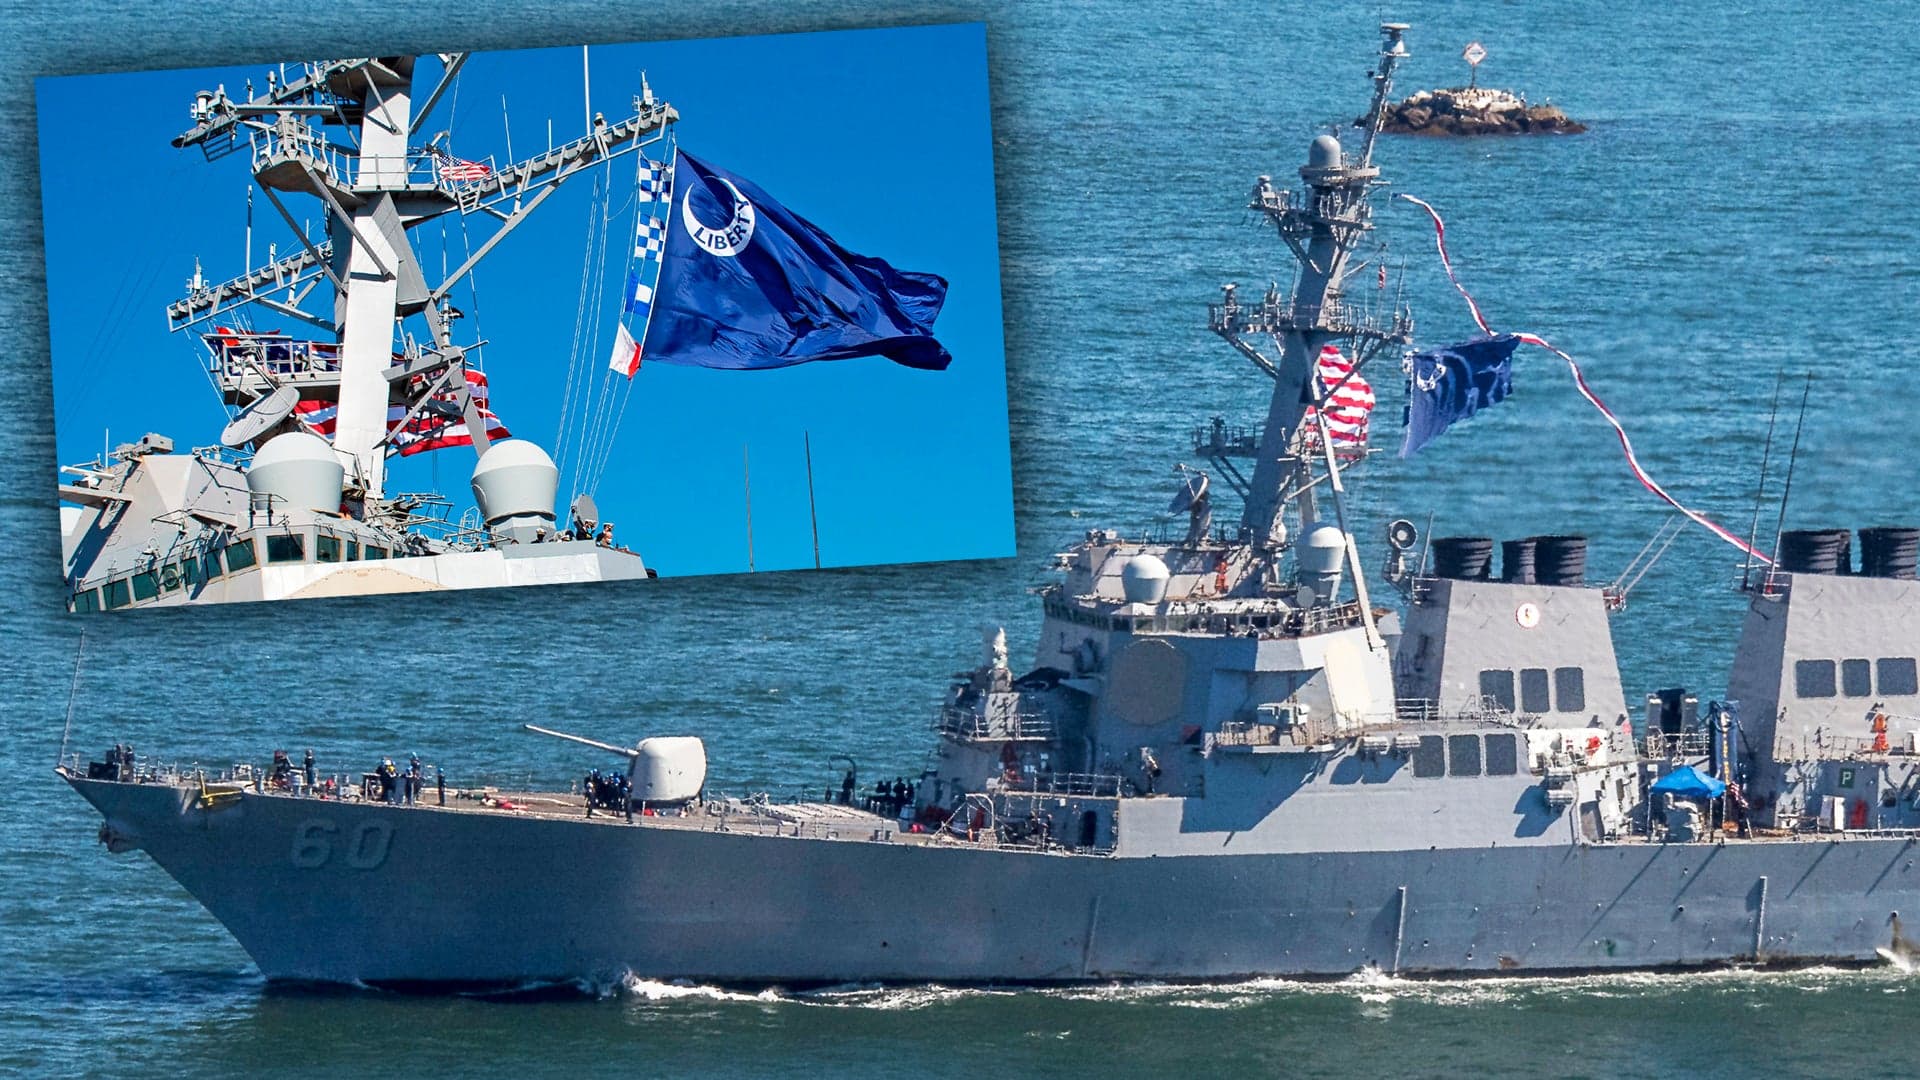 Why The Destroyer USS Paul Hamilton Came Home Flying A Crescent Moon Flag And A Long Pennant